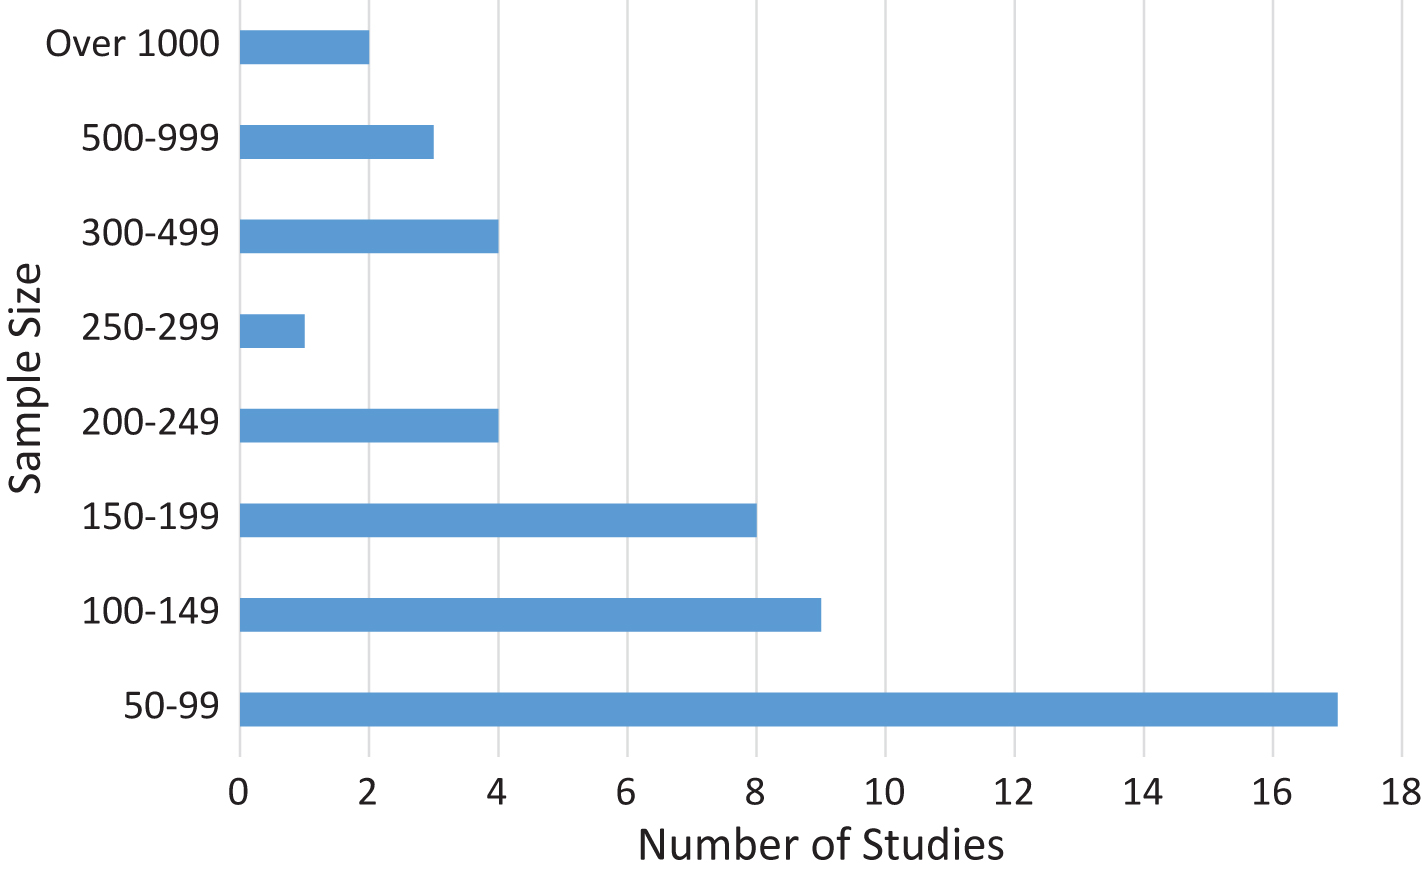 Sample size. The number of studies with sample size in the displayed range.